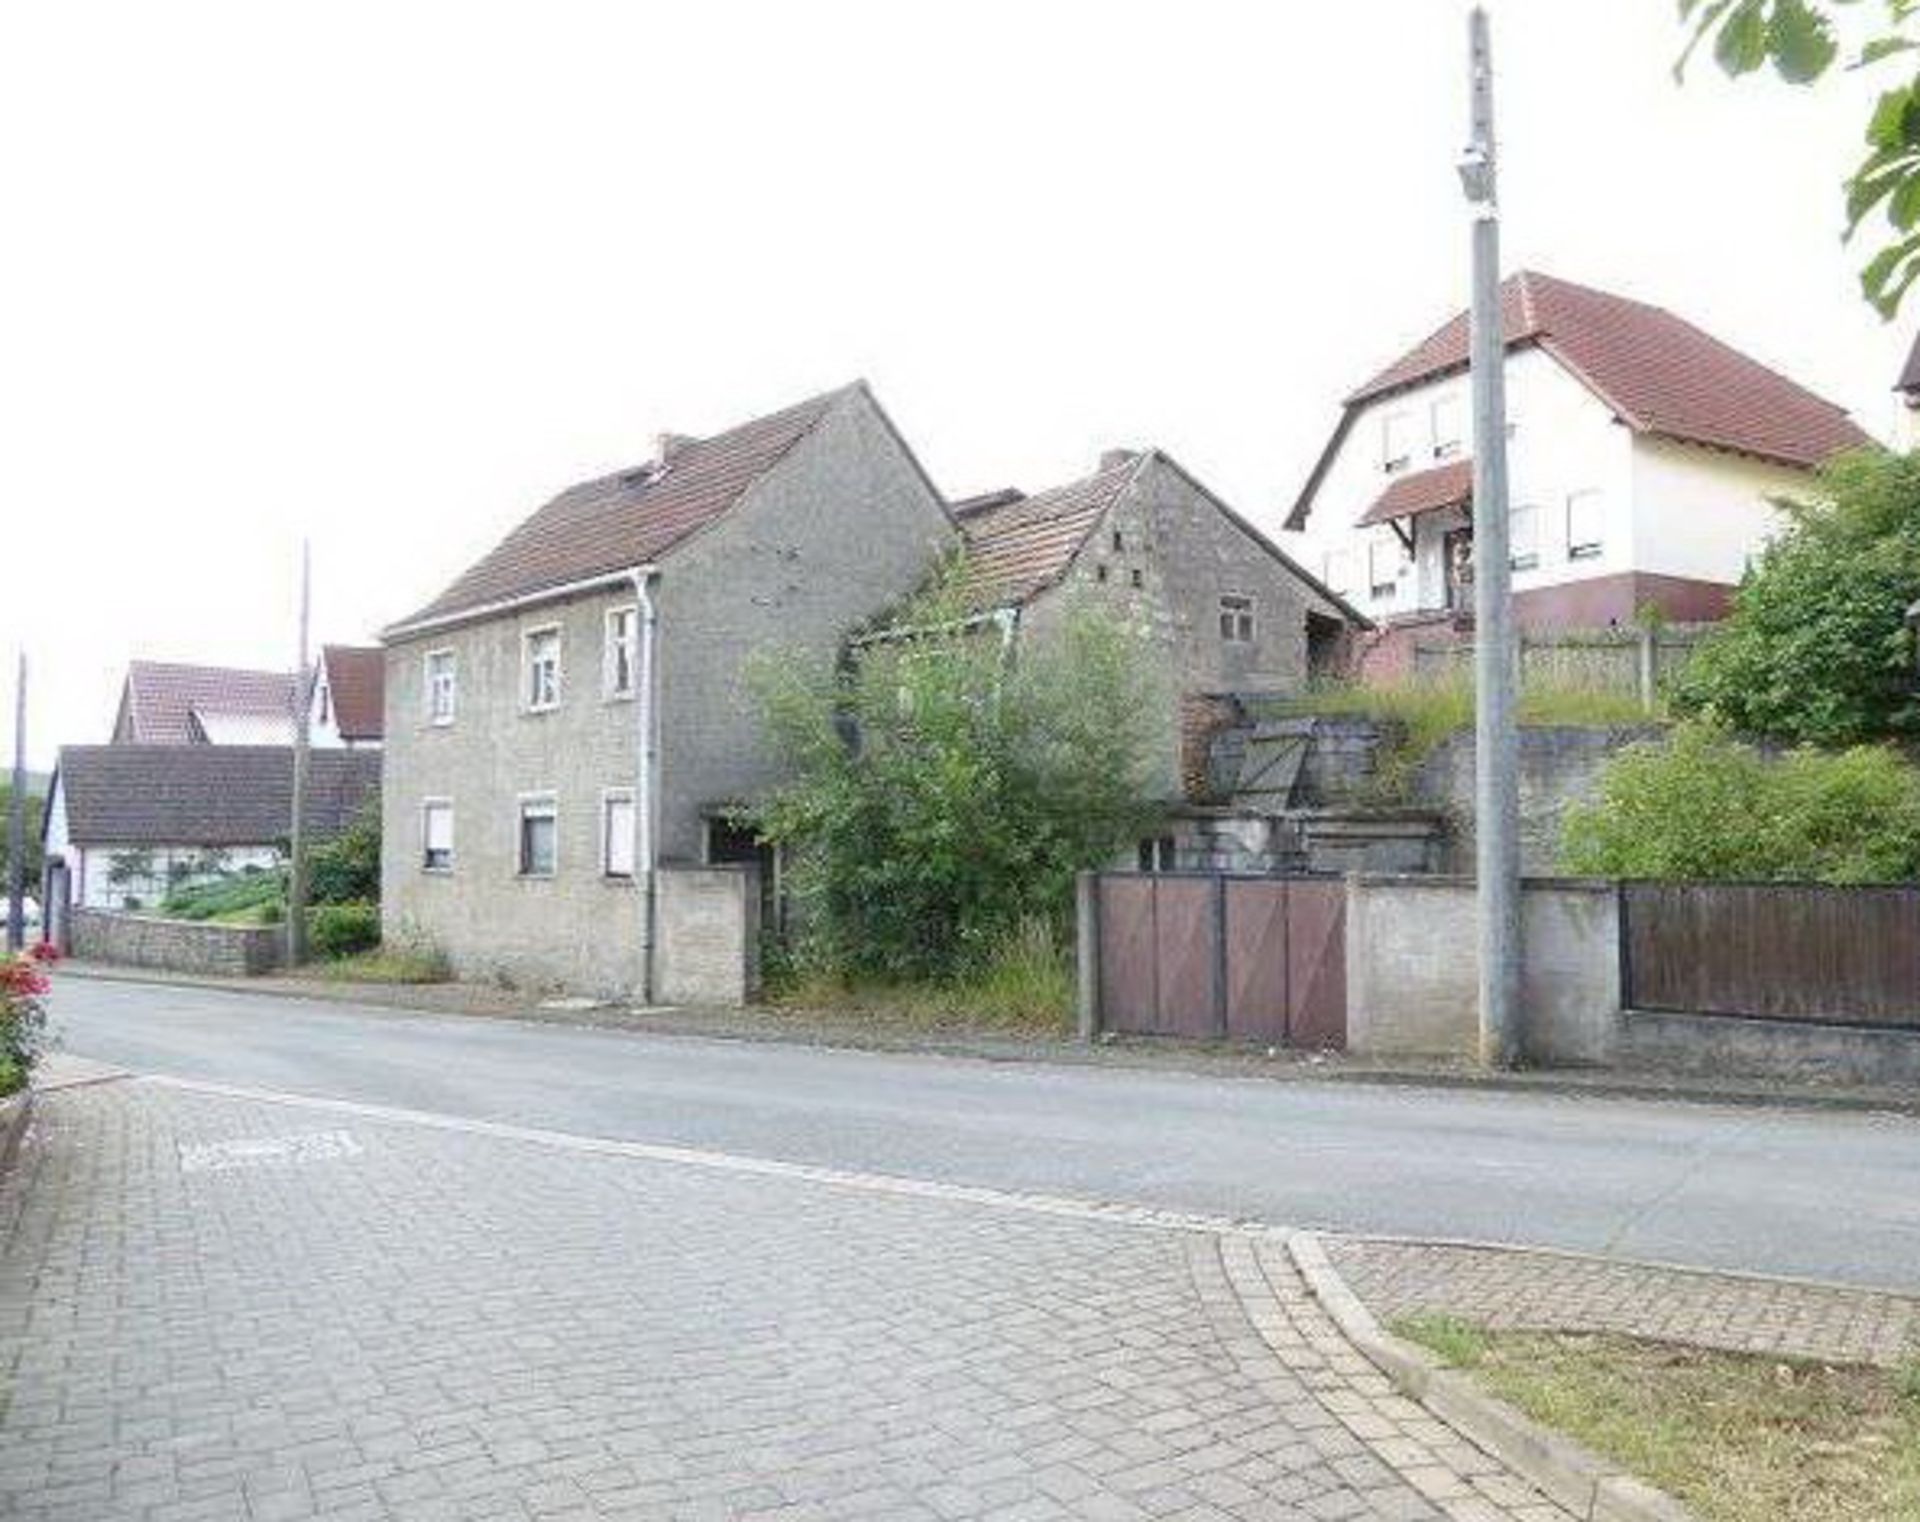 Two Storey Family Home in Sudharz, Germany only 10% BUYER'S PREMIUM TODAY - Image 21 of 51